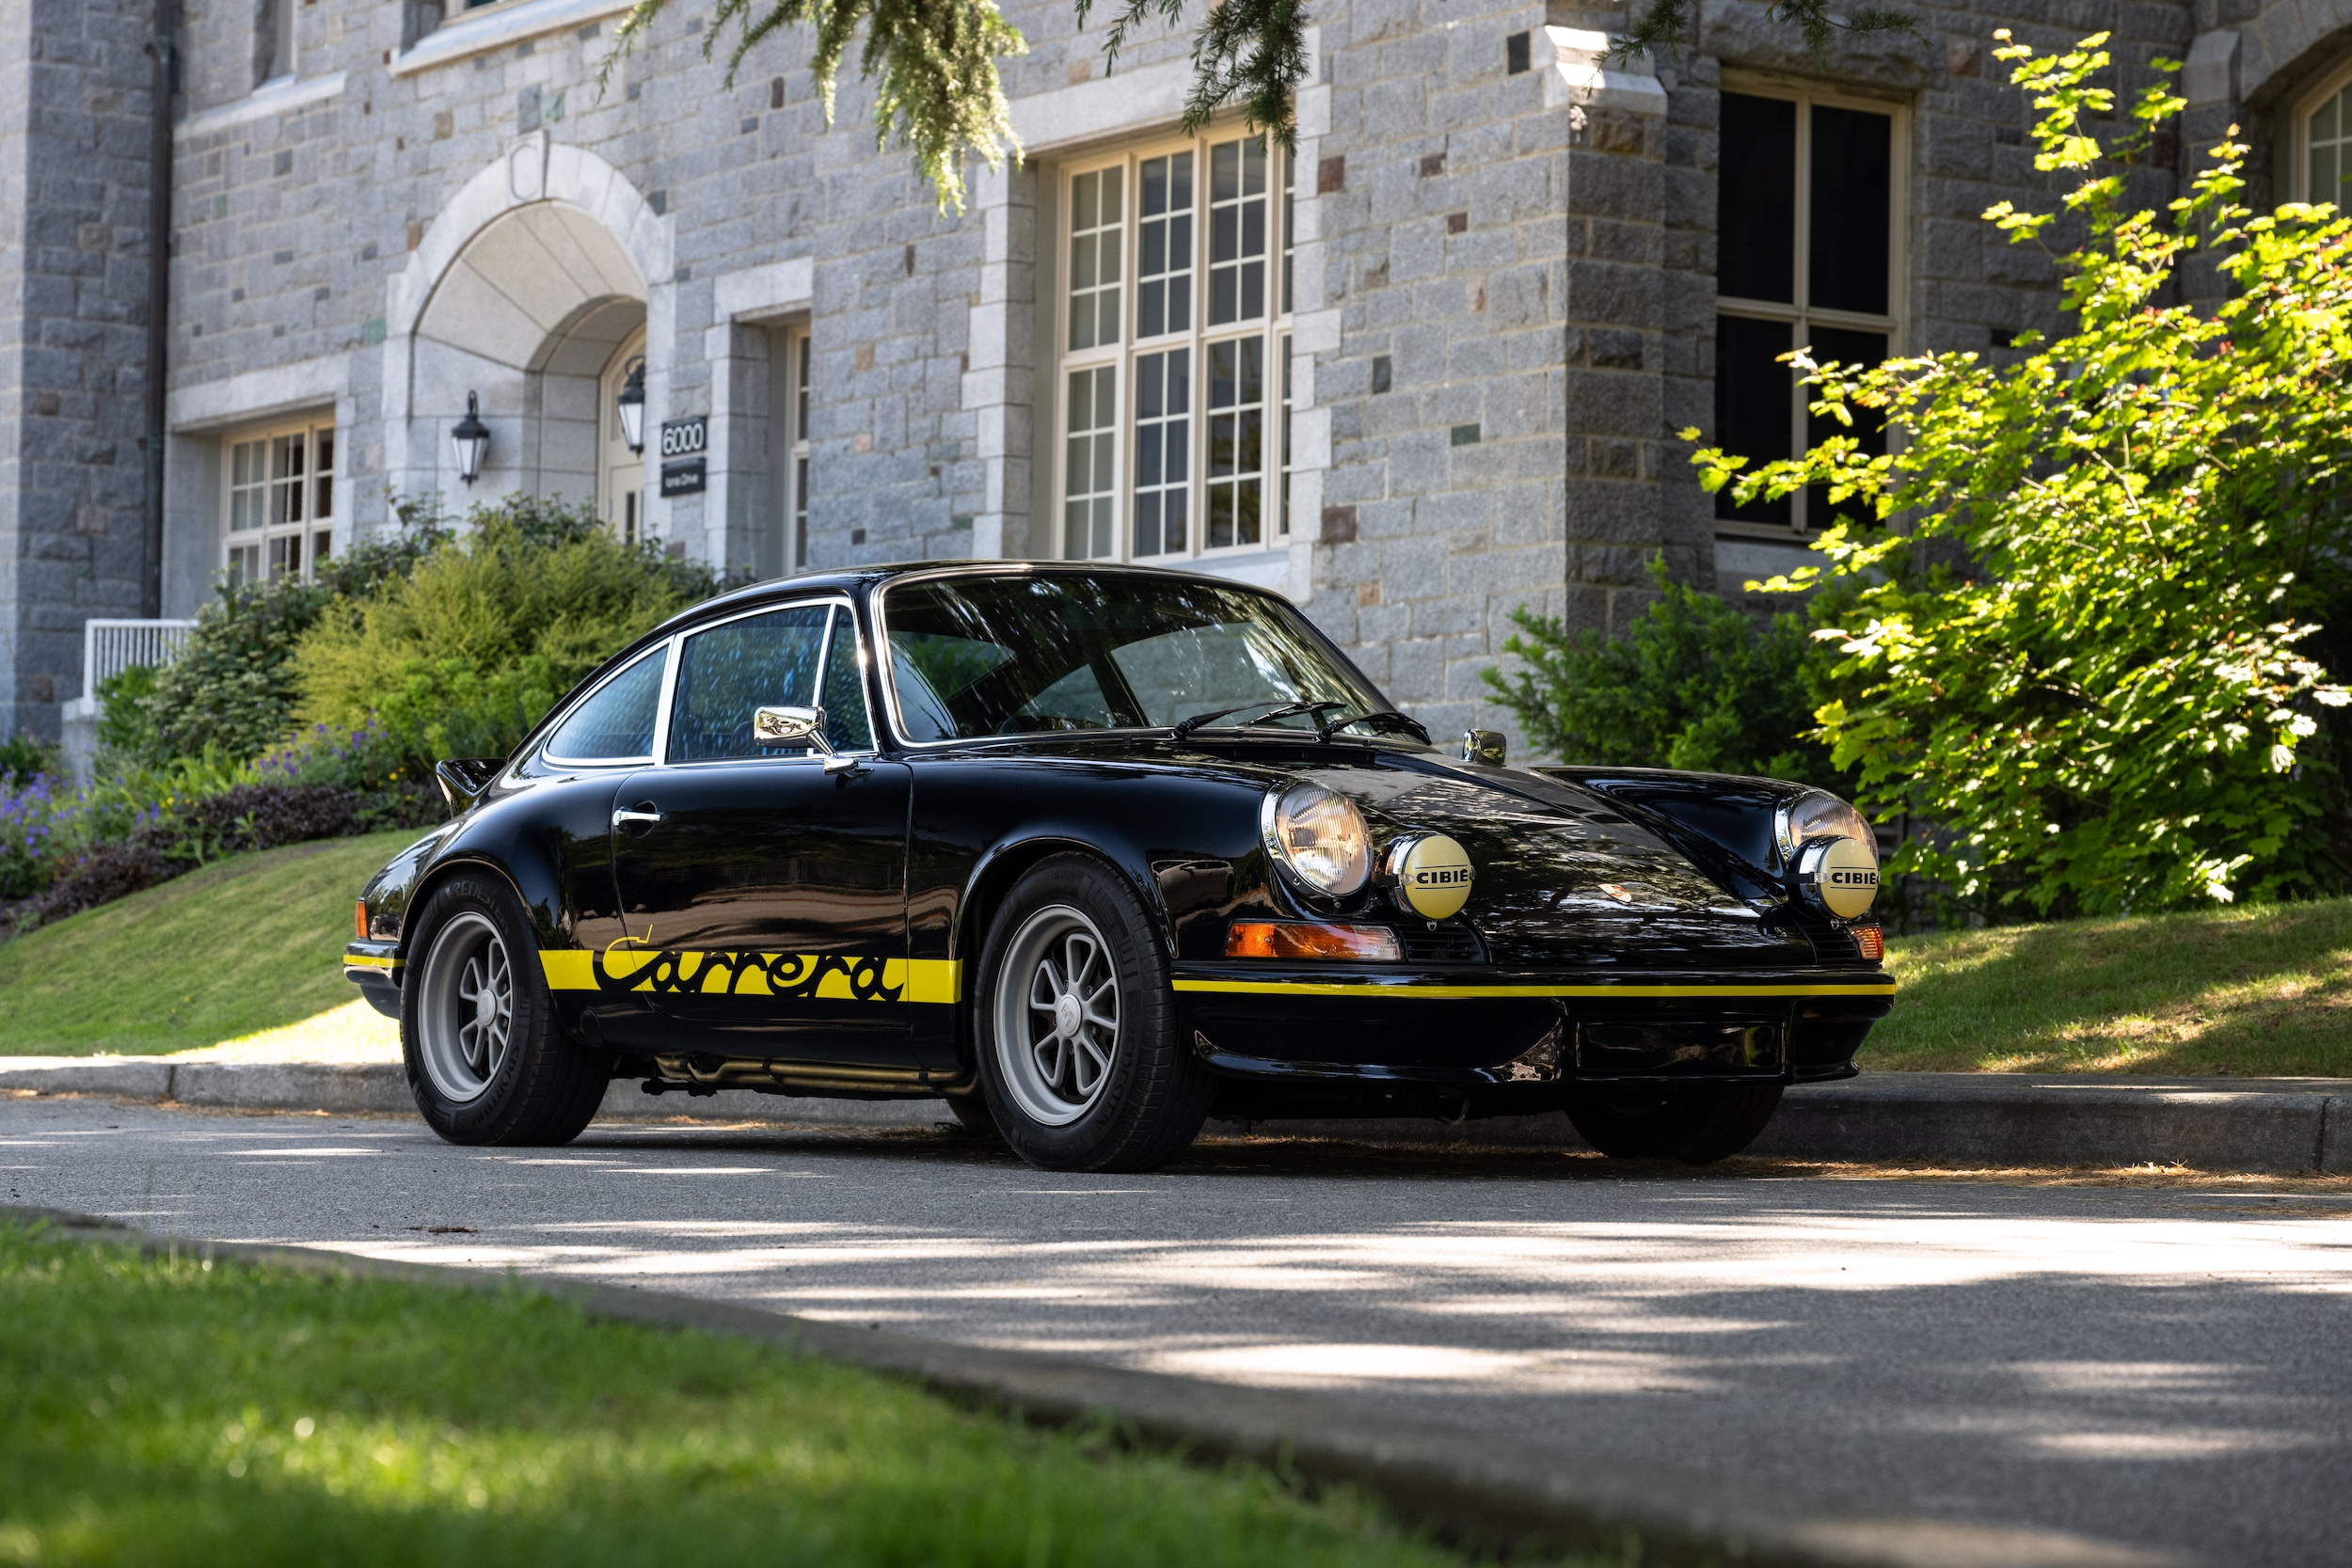 Used 1978 Porsche 911 SC Backdate For Sale at Weissach | VIN:  00000009118201997